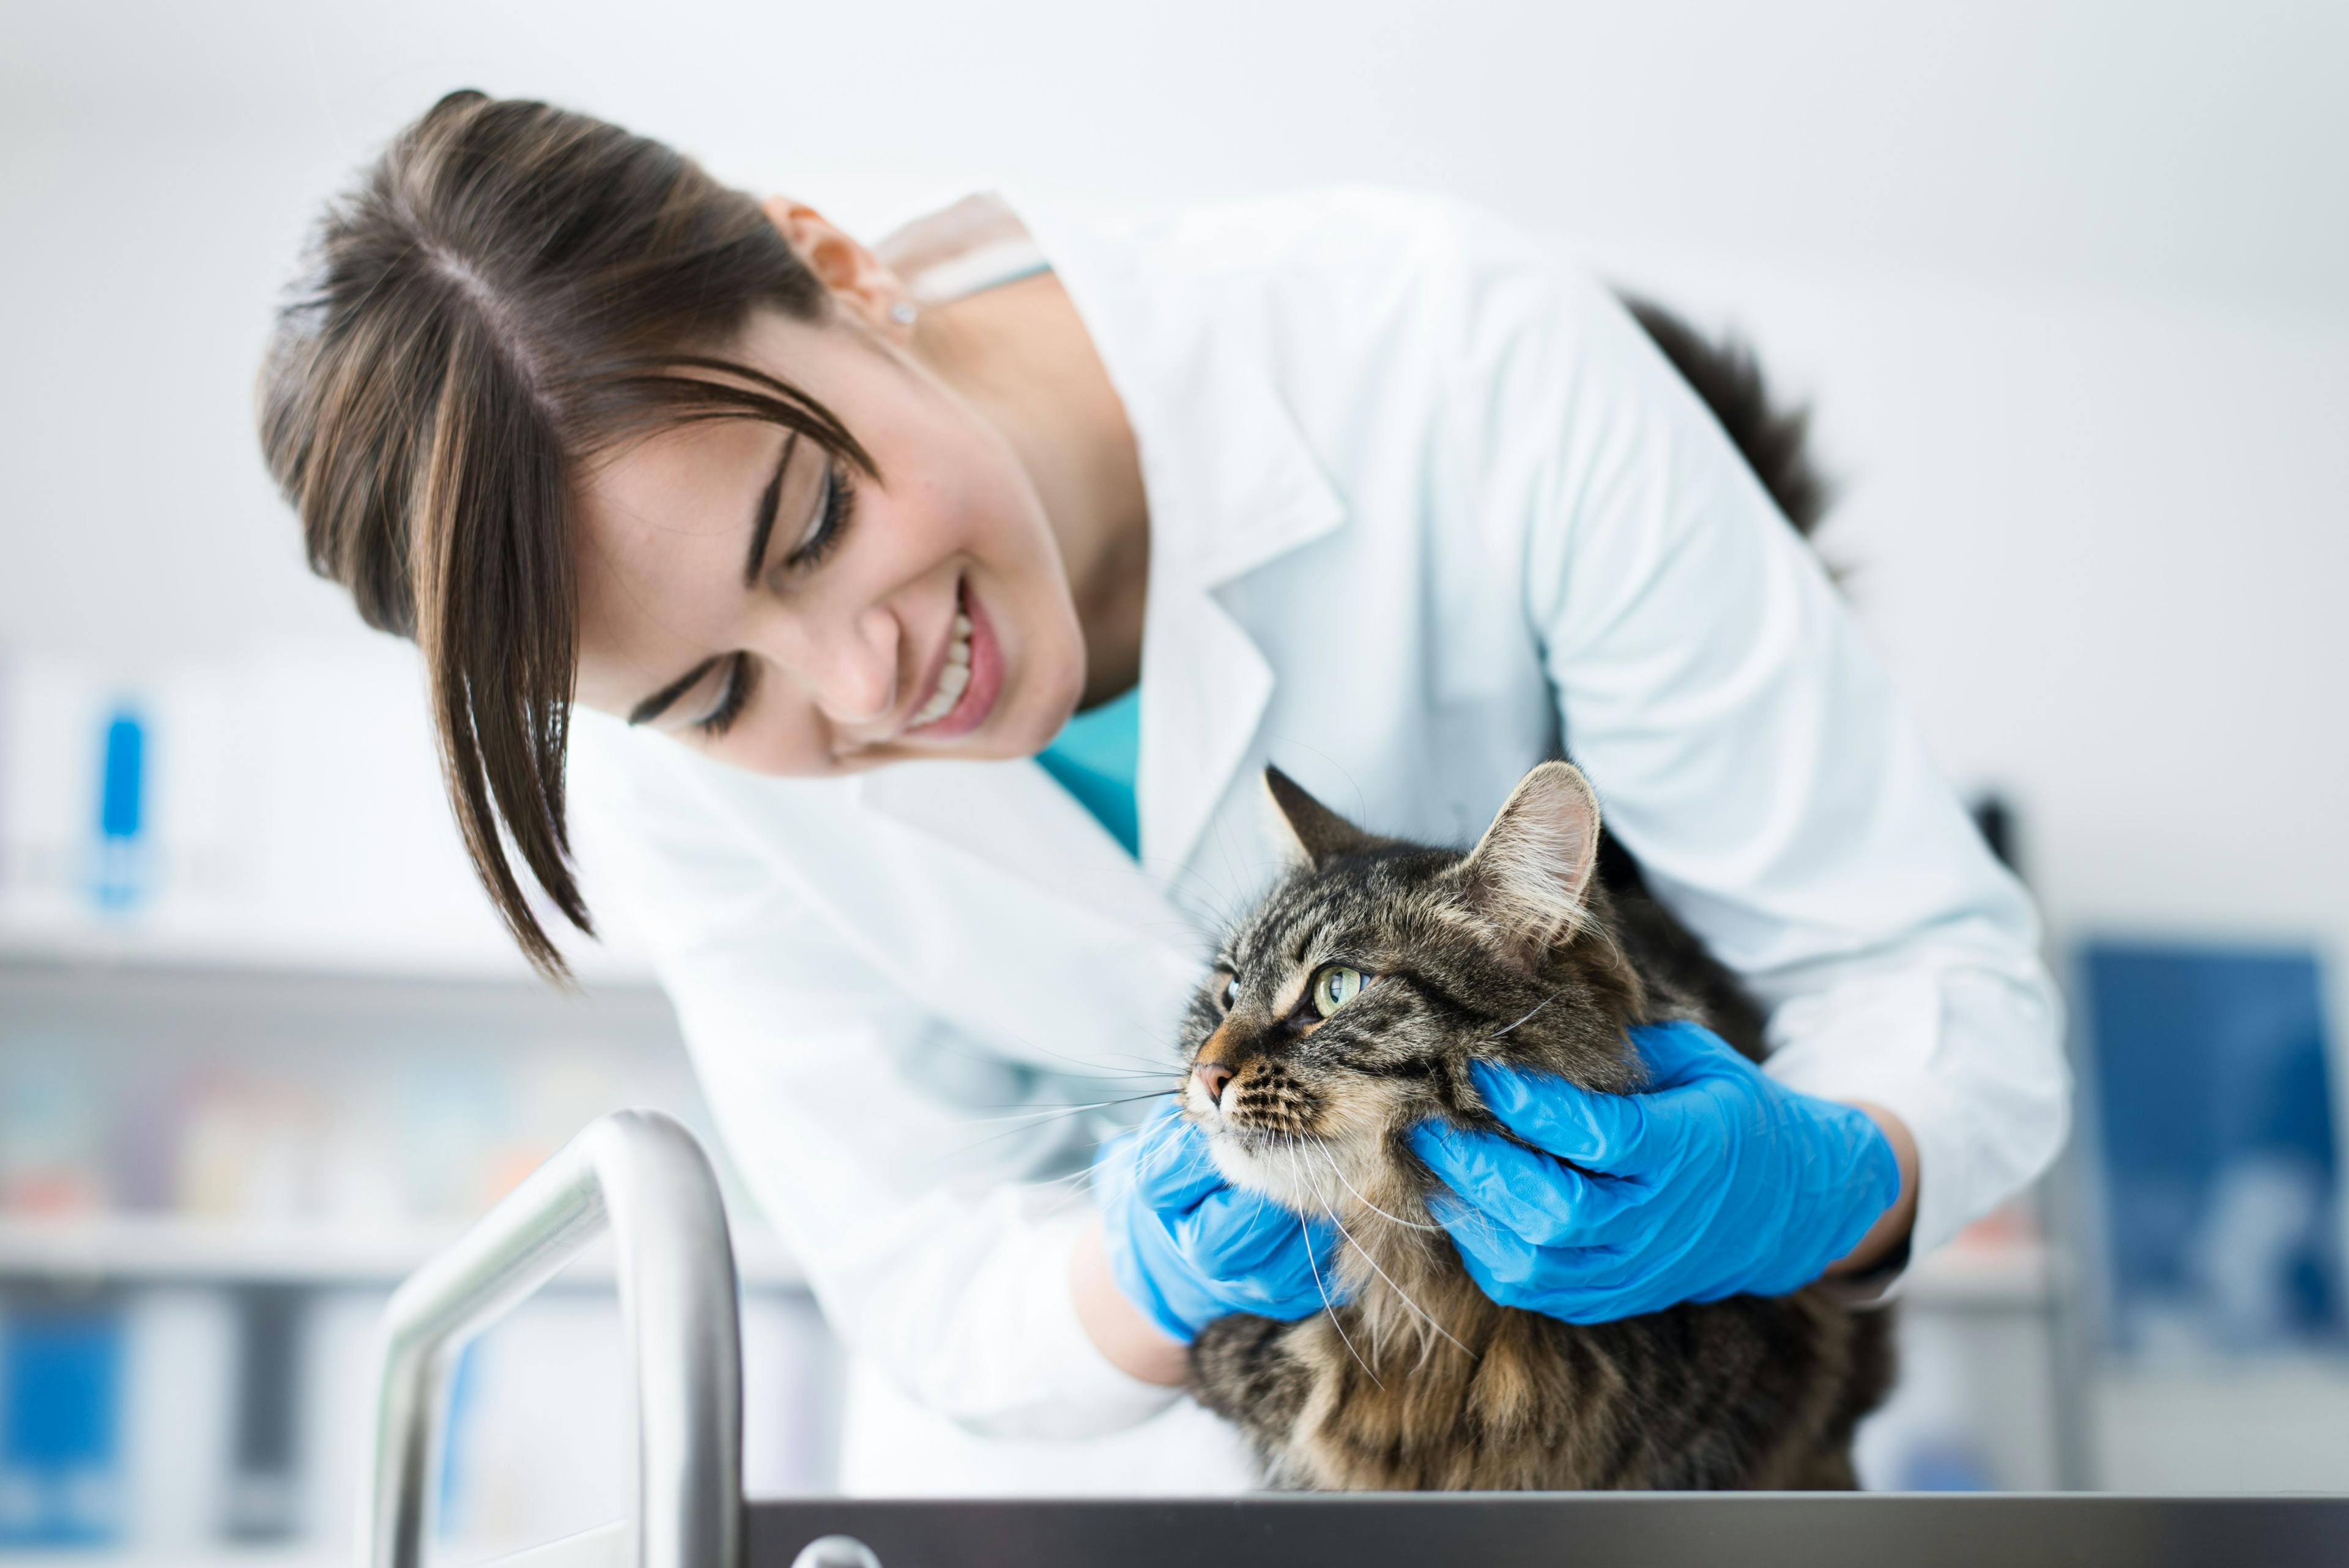 Is relief veterinary medicine for you?